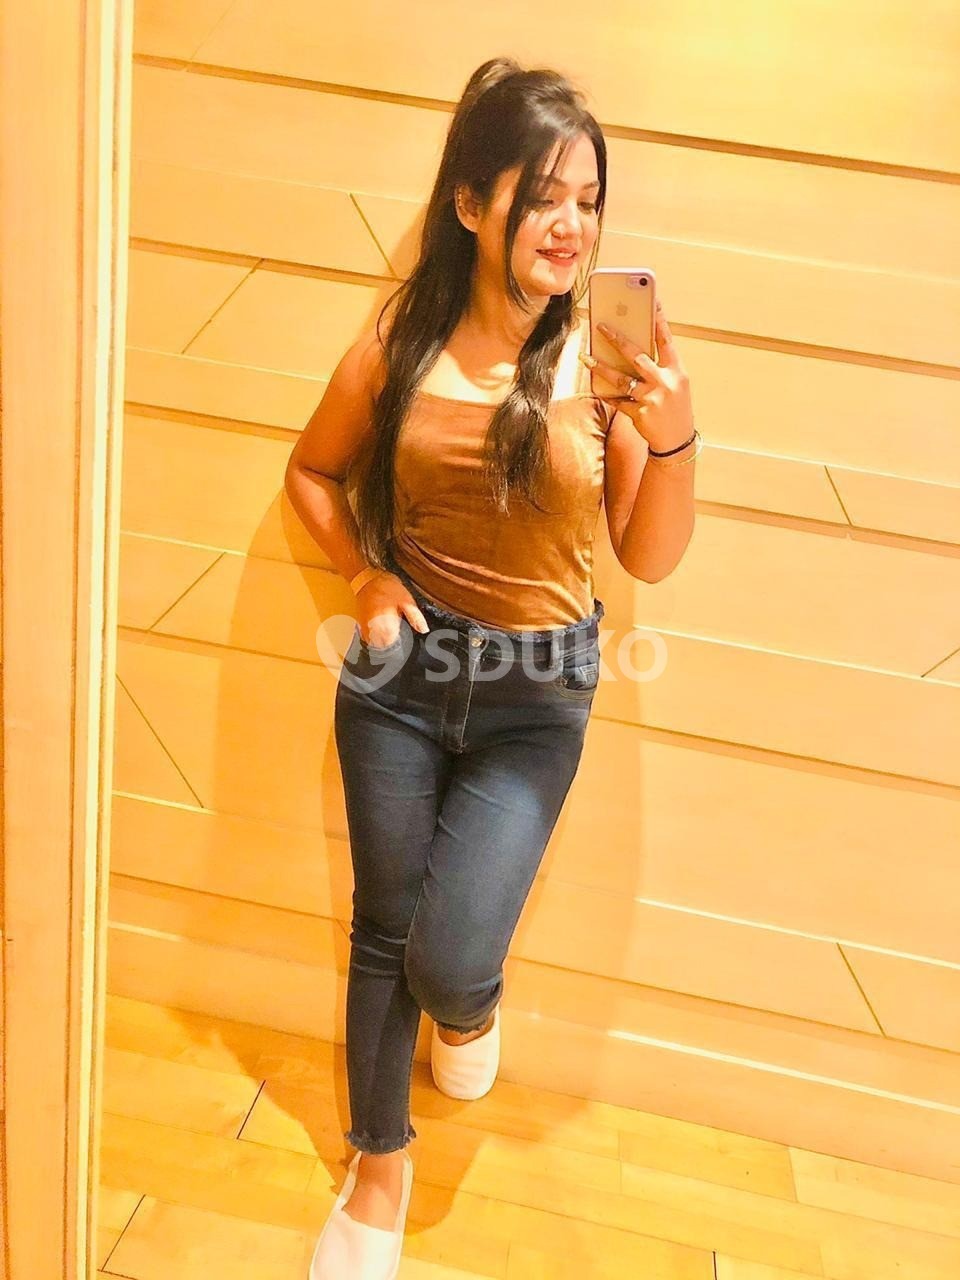 24X7 SERVICE AVAILABLE IN JAYANAGAR 100% SAFE AND SECURE TODAY LOW PRICE UNLIMITED ENJOY HOT COLLEGE GIRL HOUSEWIFE AUNT